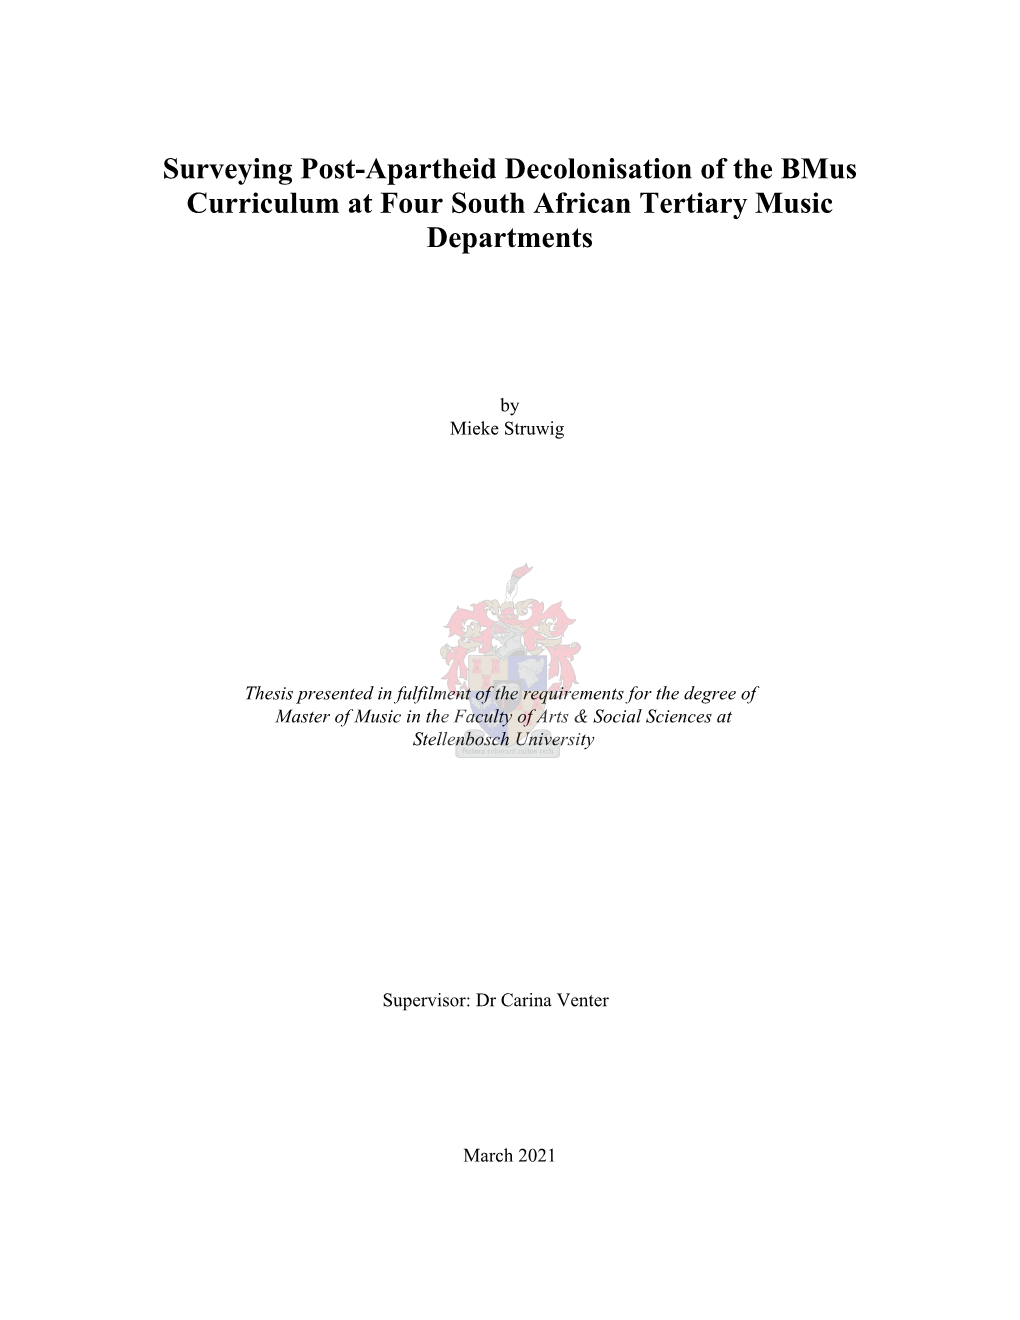 Surveying Post-Apartheid Decolonisation of the Bmus Curriculum at Four South African Tertiary Music Departments